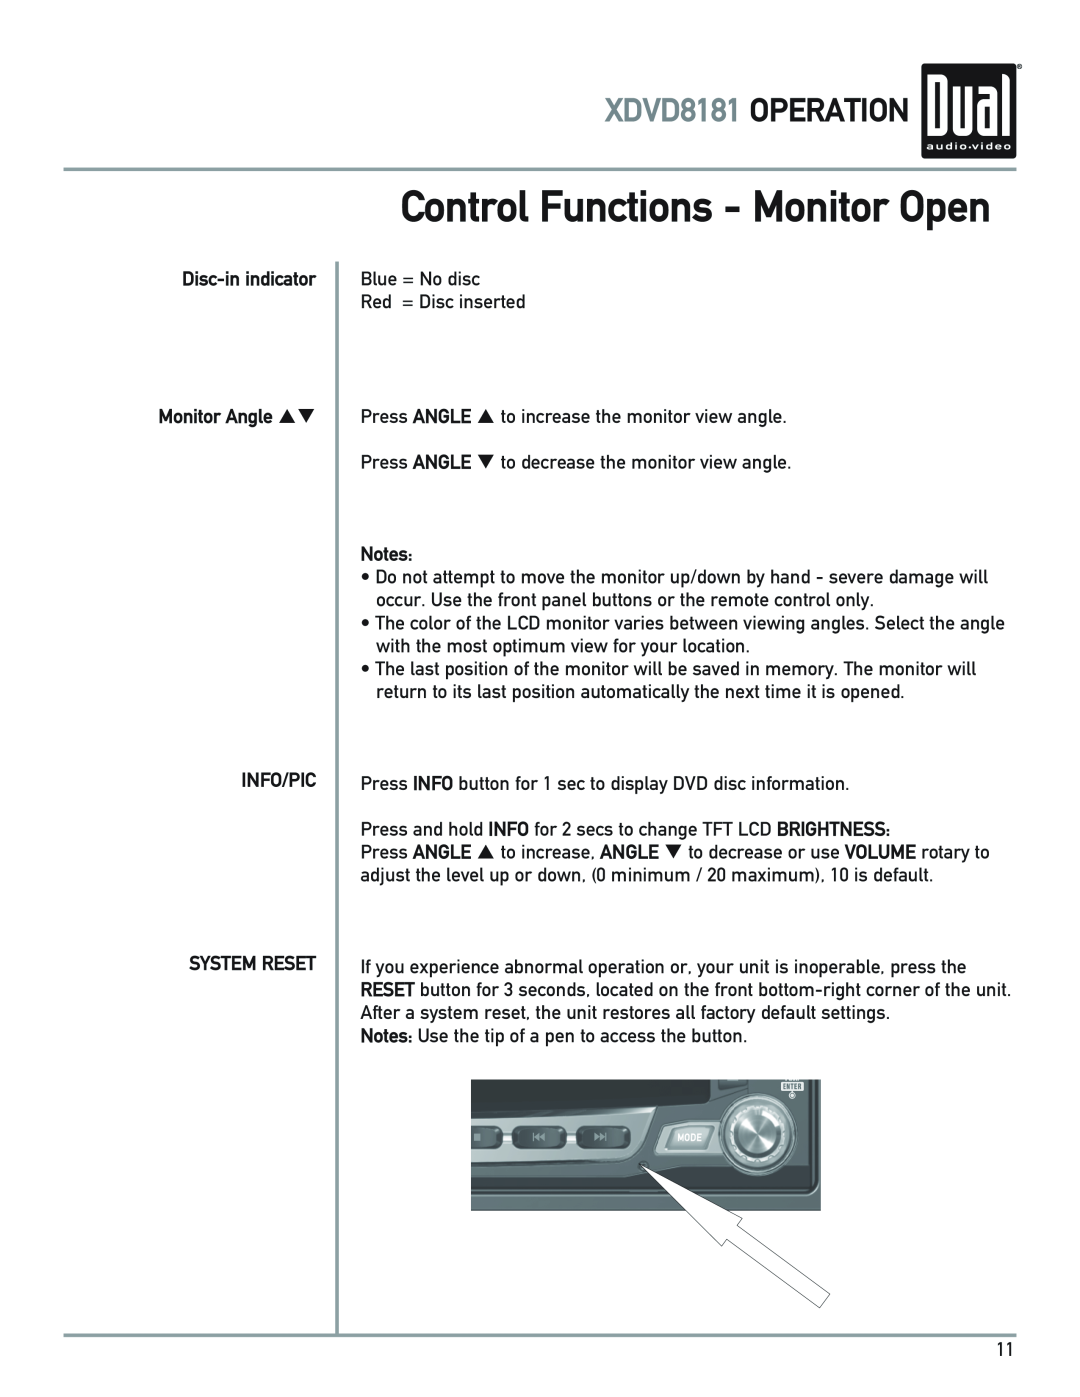 Dual Control Functions - Monitor Open, XDVD8181 OPERATION, Disc-inindicator Monitor Angle pq INFO/PIC, System Reset 